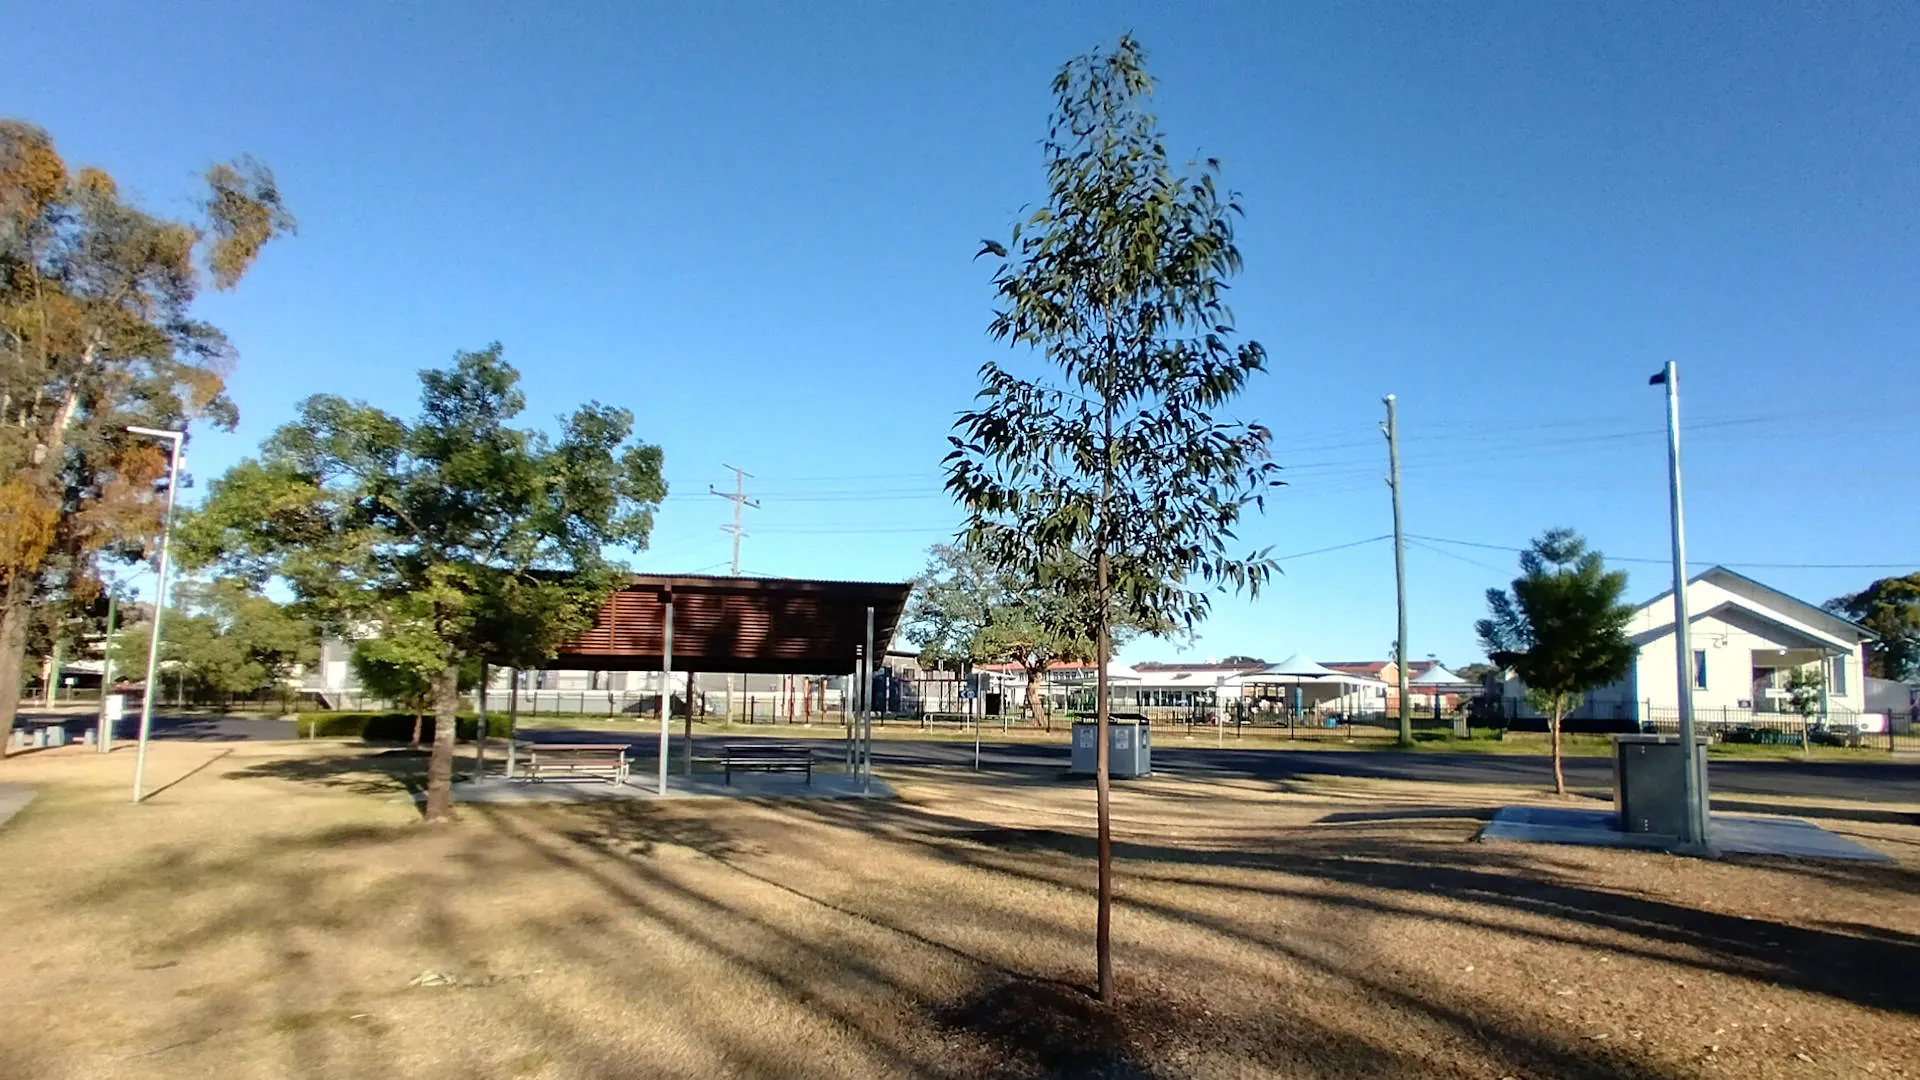 Park at Myall Creek in Dalby, sheltered picnic tables, bins, and BBQ